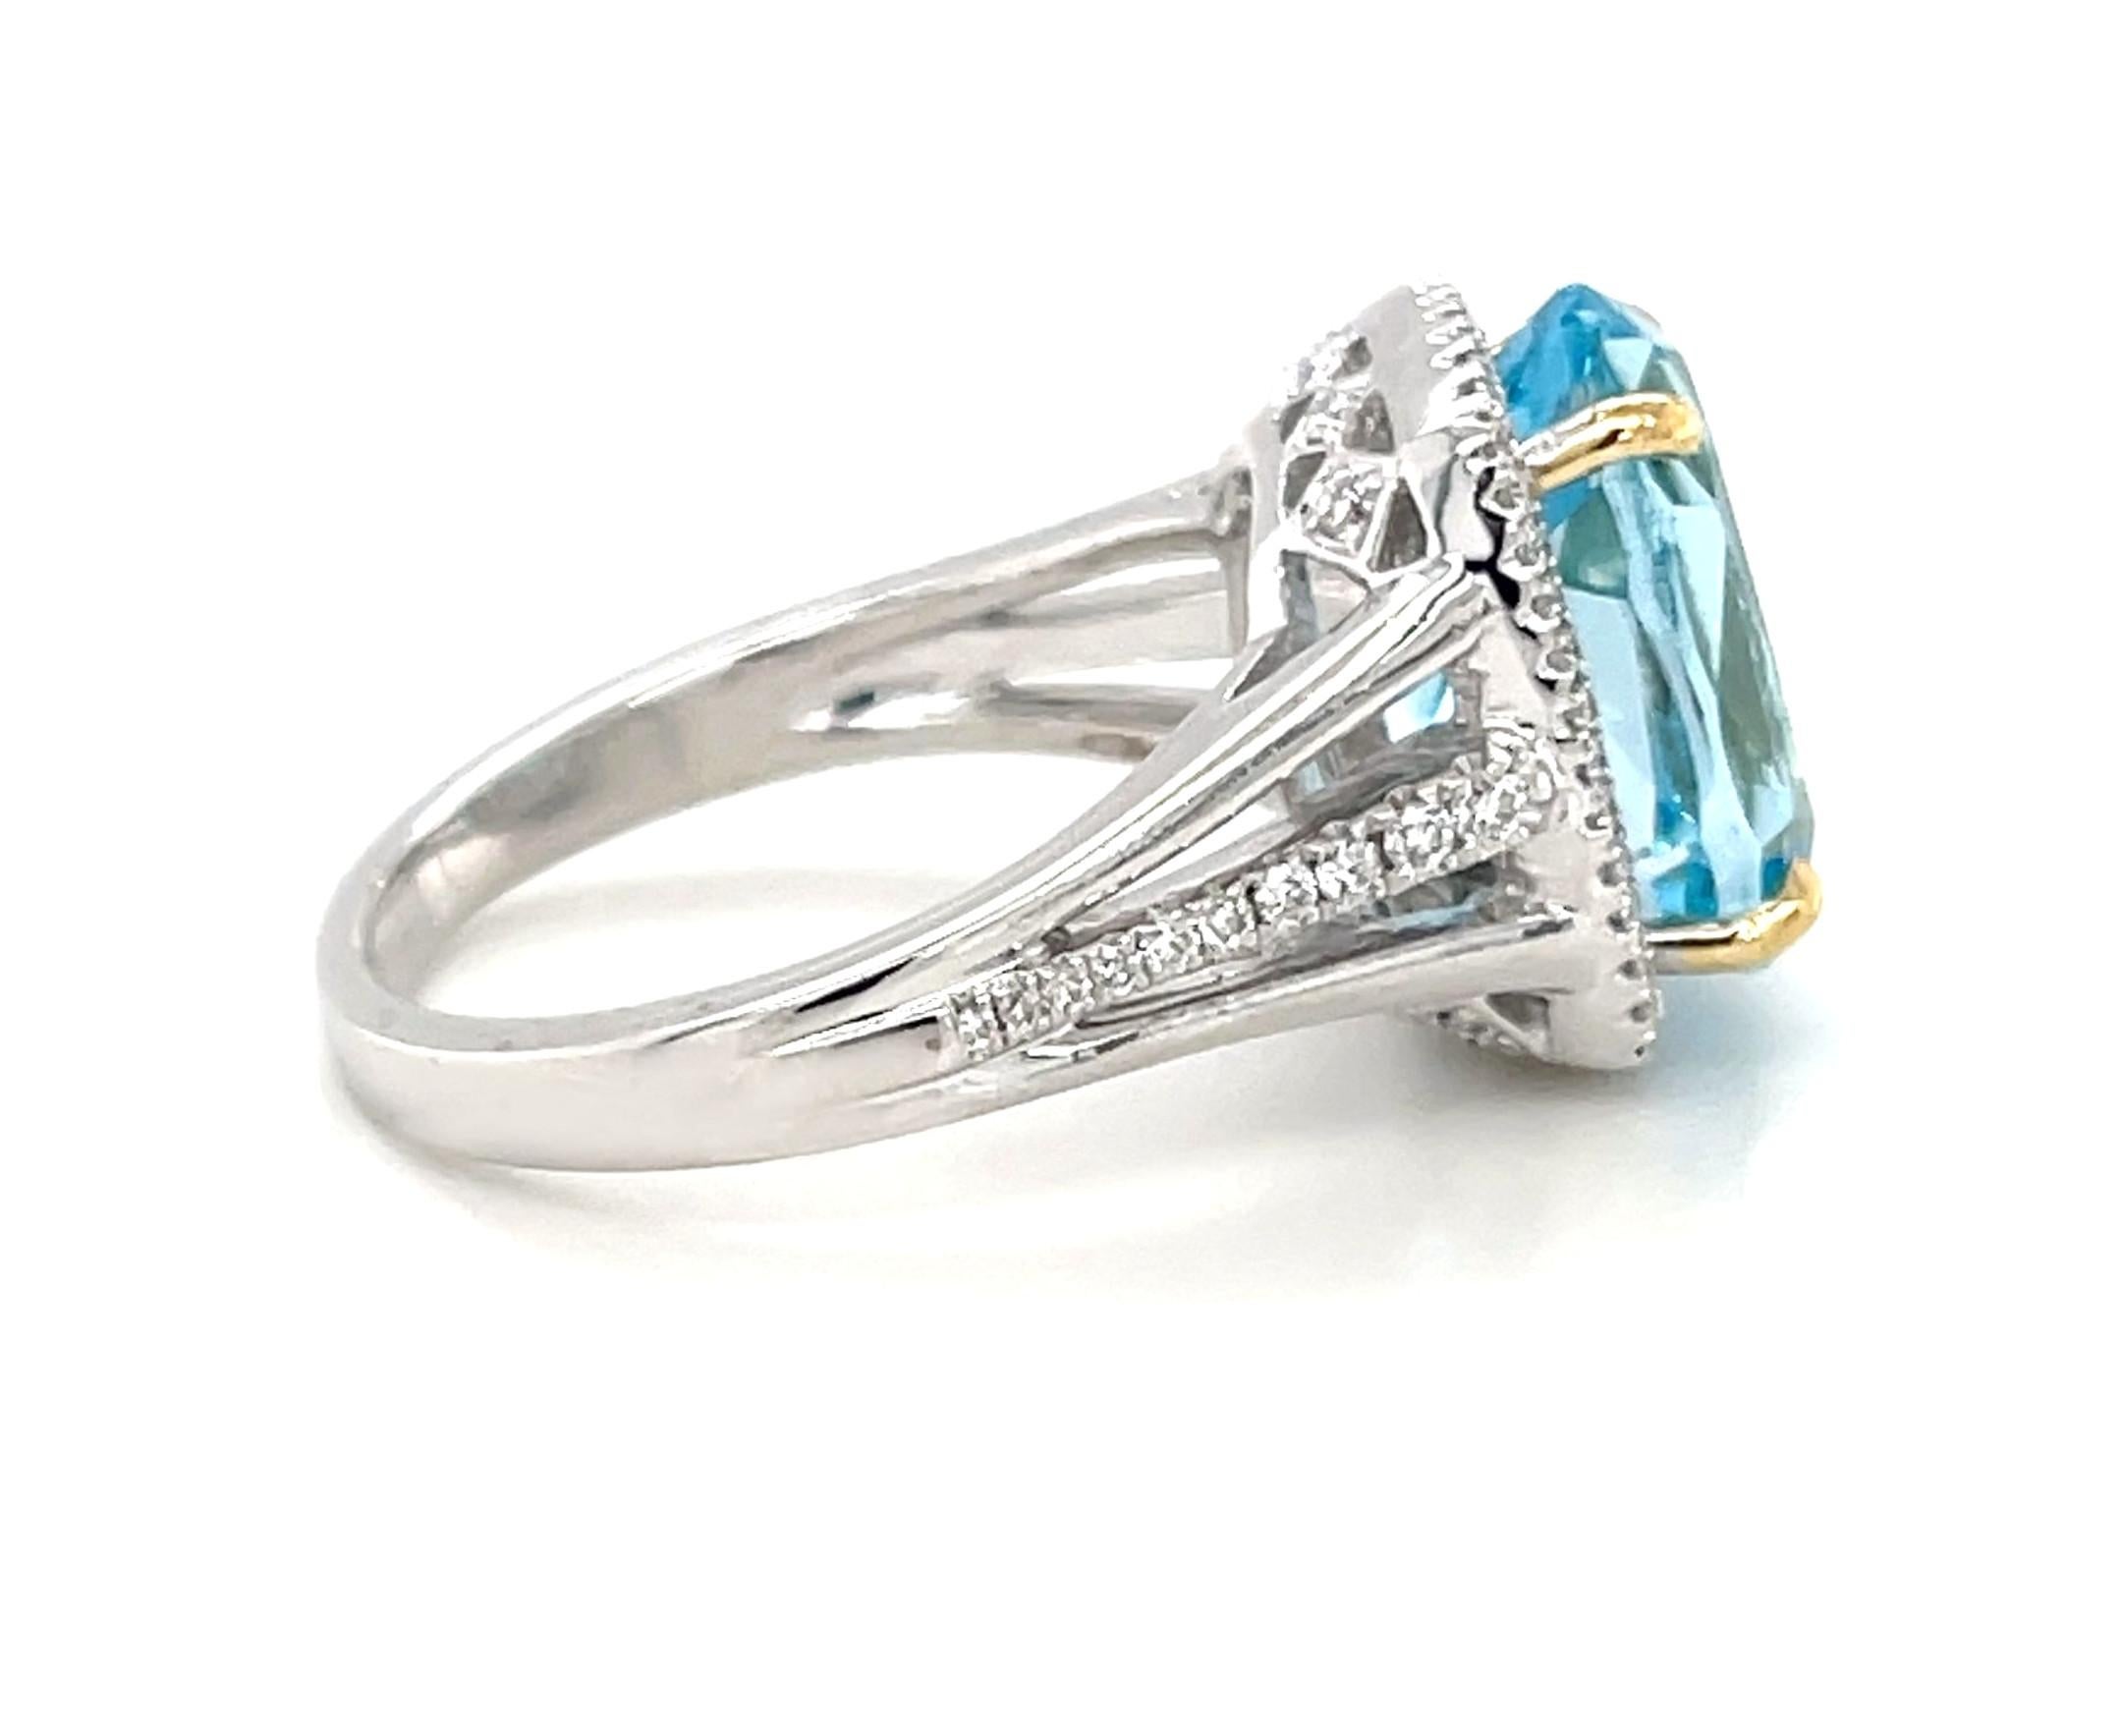 Oval Cut 8.59 Carat Blue Topaz and Diamond Halo Cocktail Ring in White and Yellow Gold For Sale